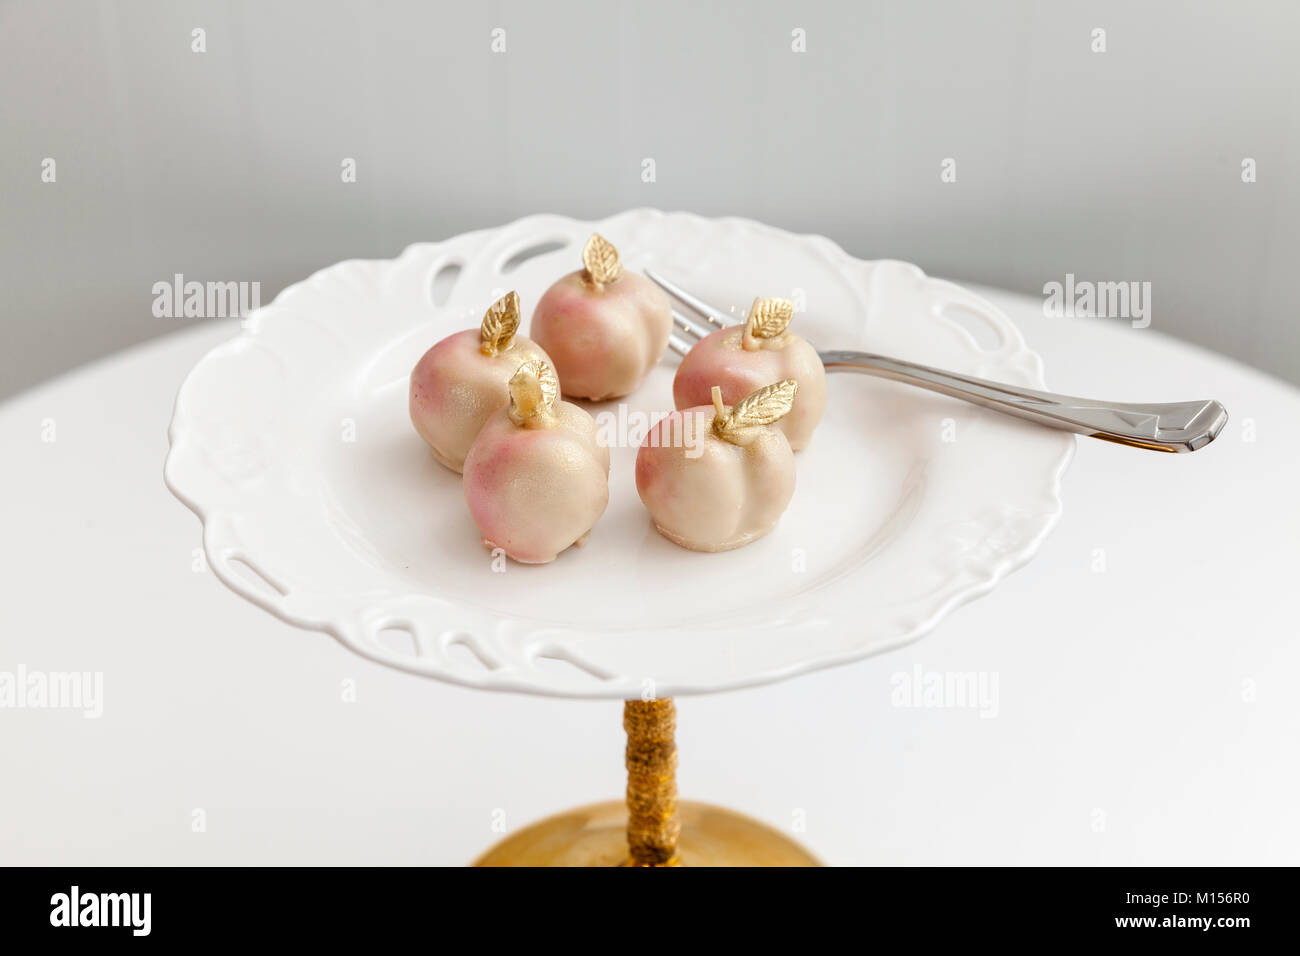 little cakes in the shape of a peach on a white plate Stock Photo